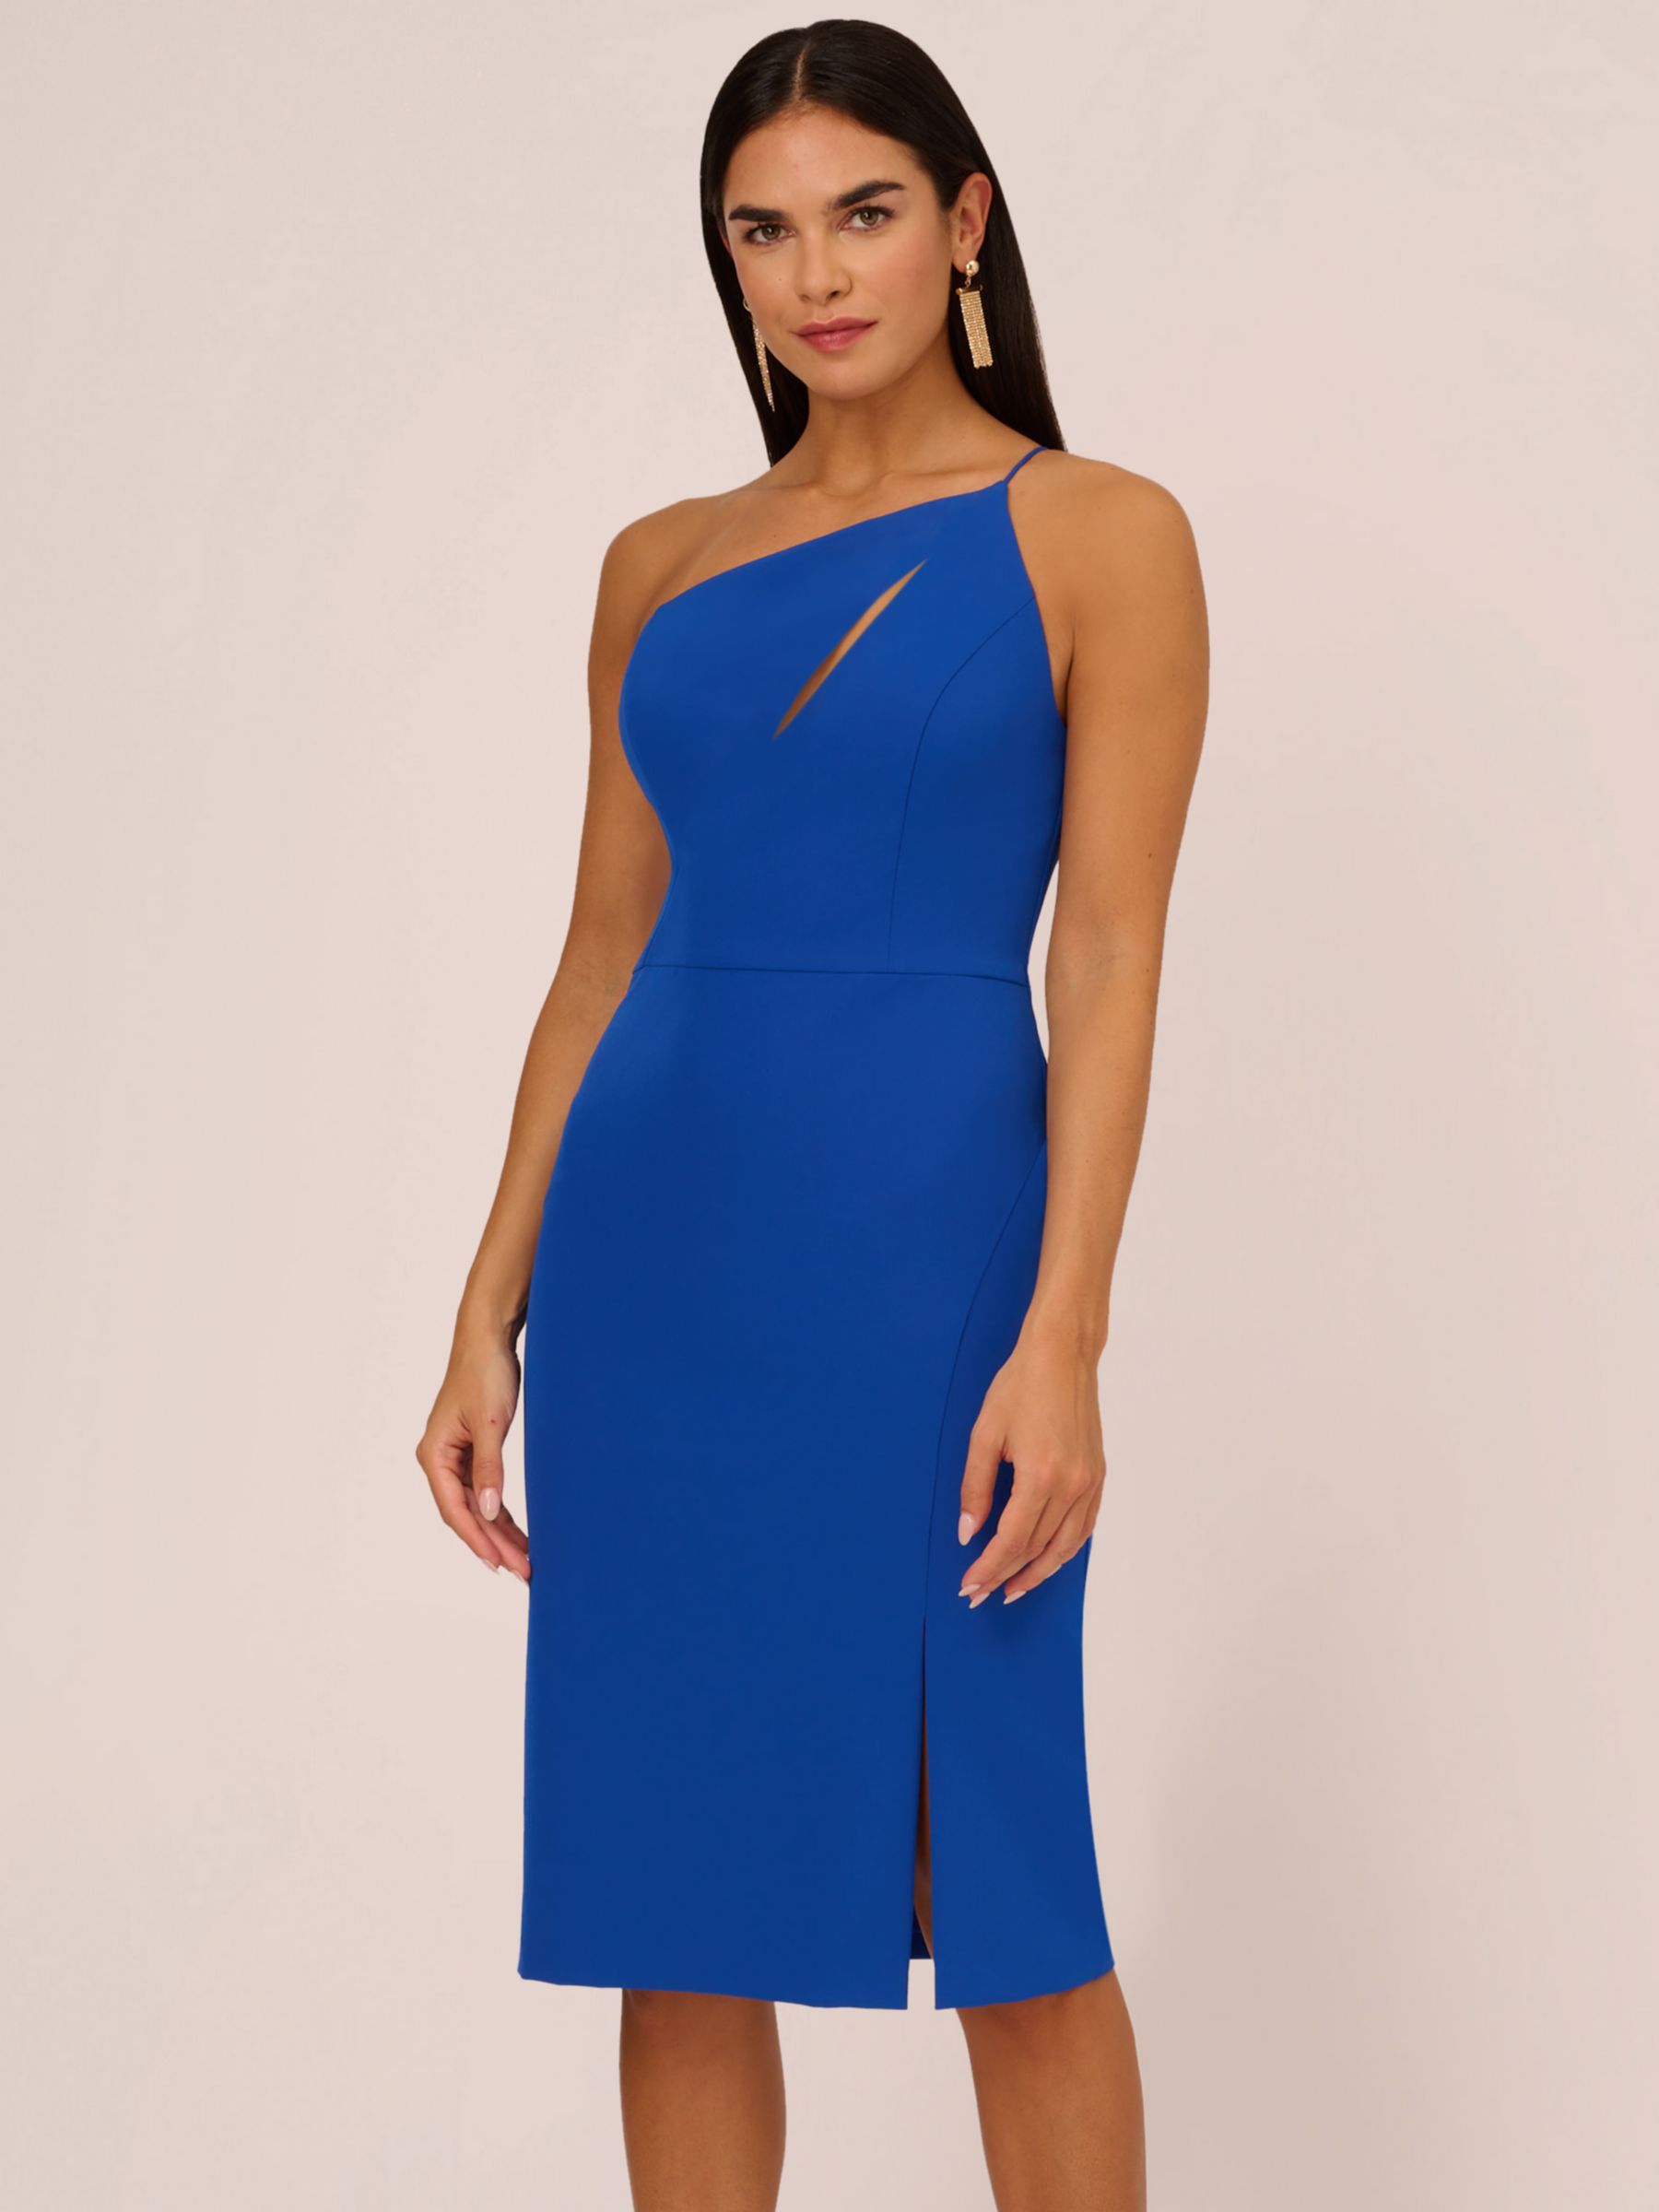 Buy Aidan by Adrianna Papell Knit Crepe On Shoulder Dress, Royal Sapphire Online at johnlewis.com